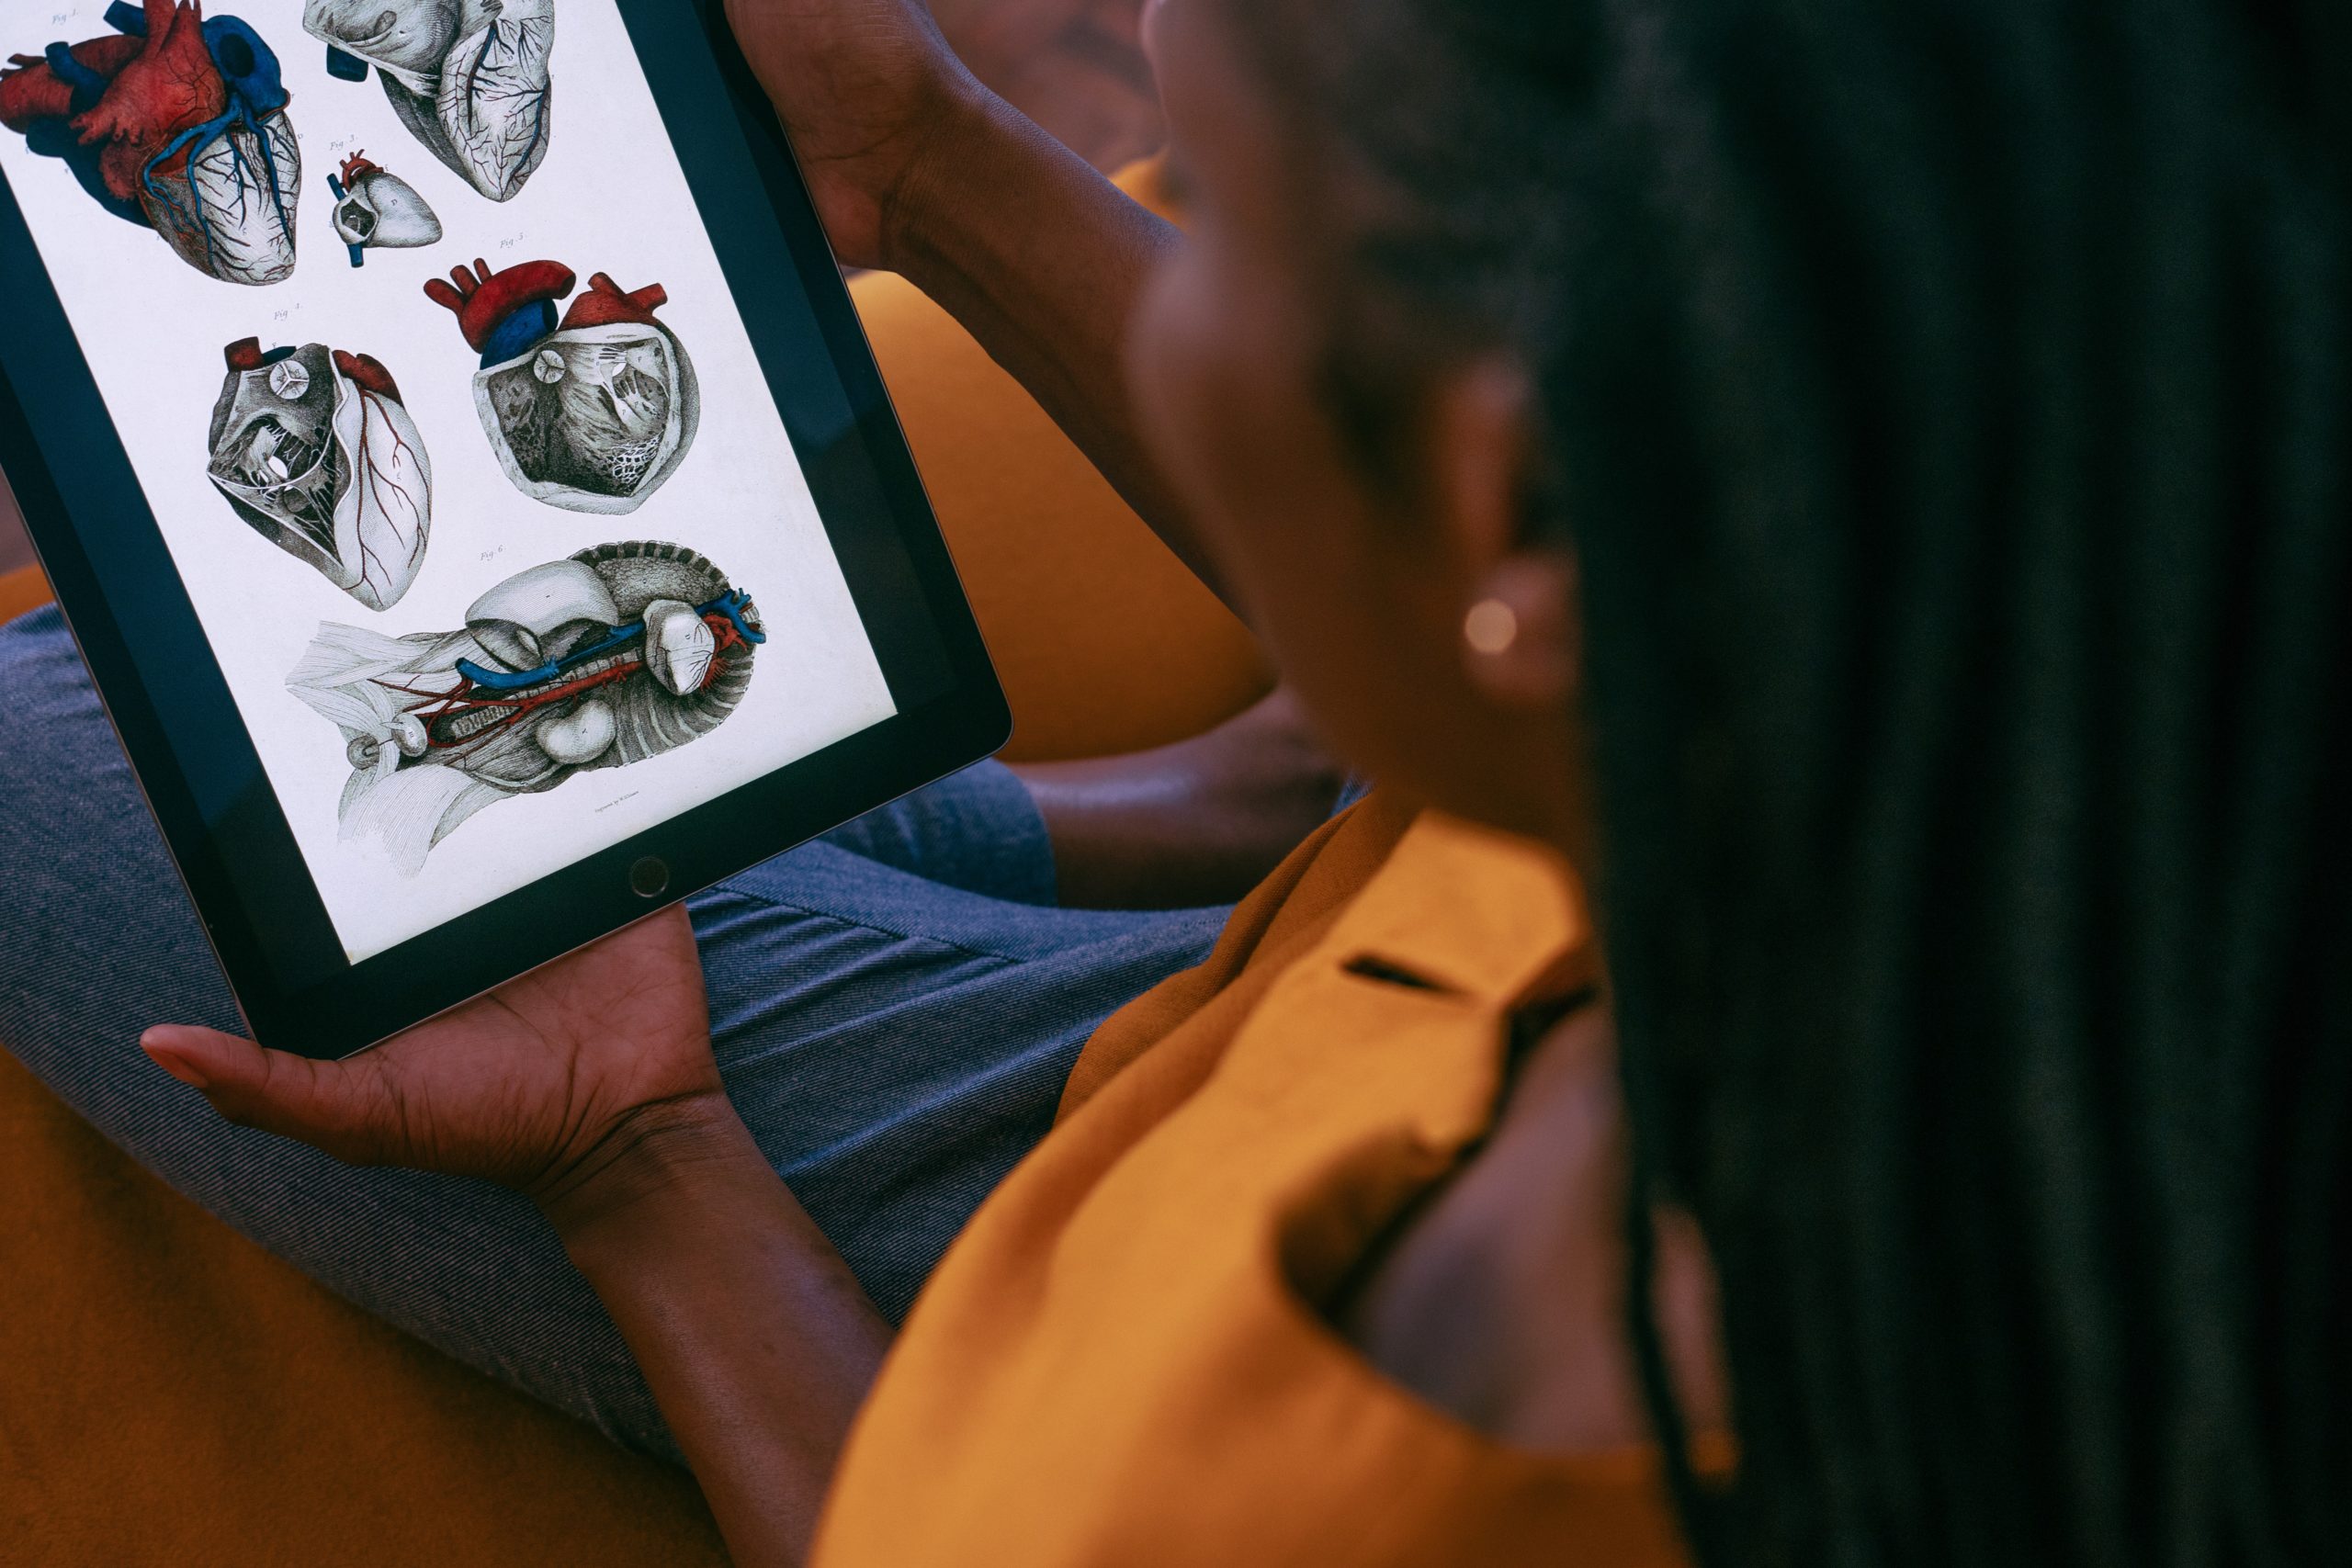 a woman is holding a tablet with drawings of anatomical hearts on it